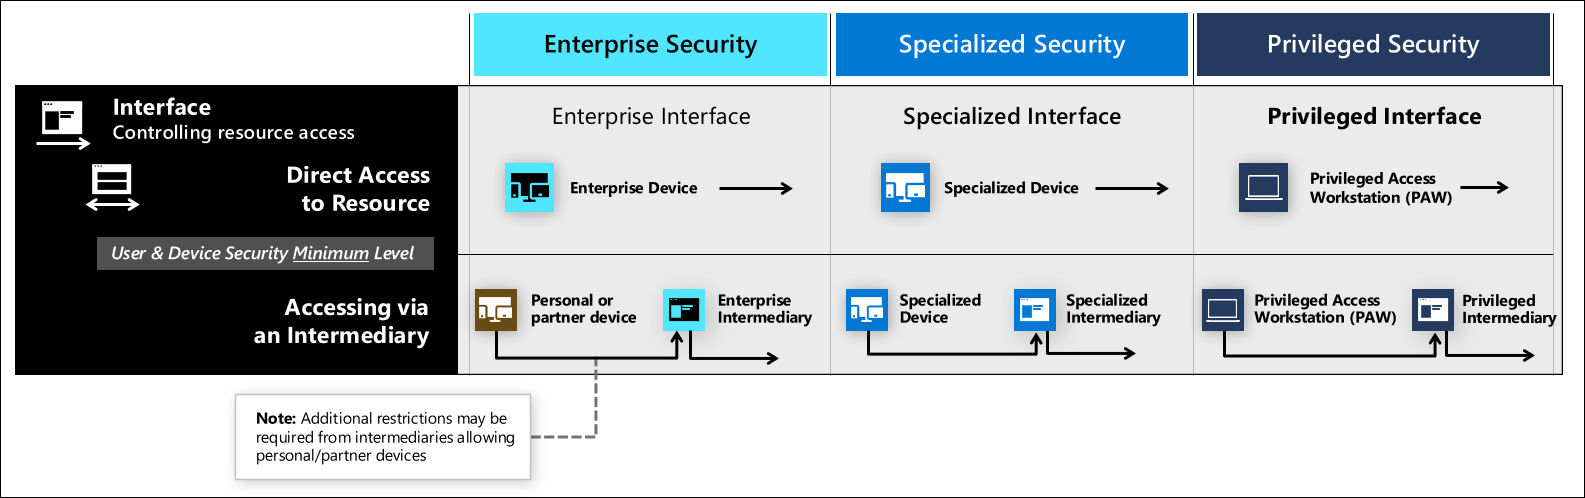 Controlling resources access to specific interface security levels